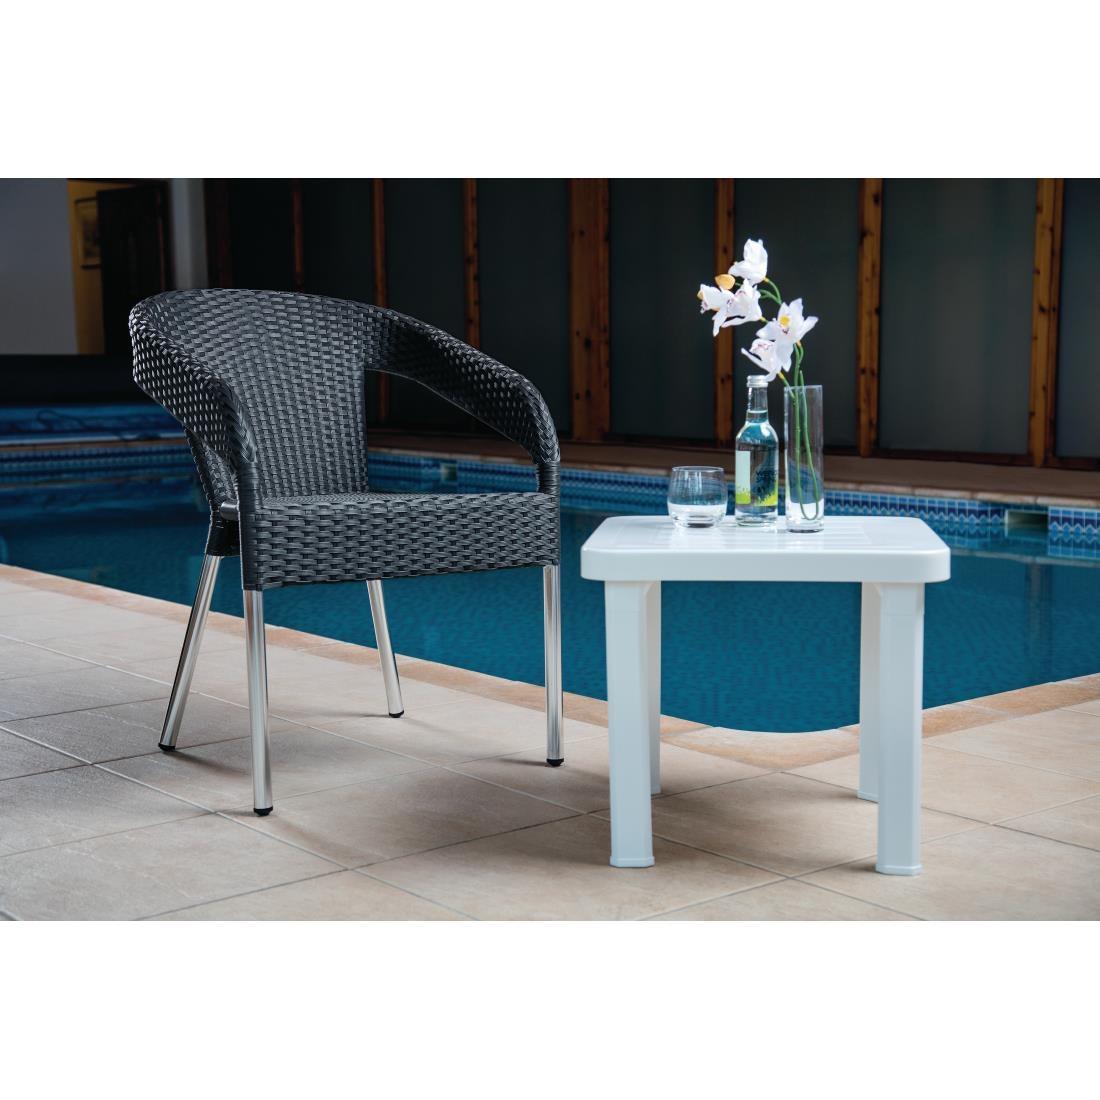 Resol Sun Lounger Side Tables 470mm (Pack of 6) - CF116  - 5